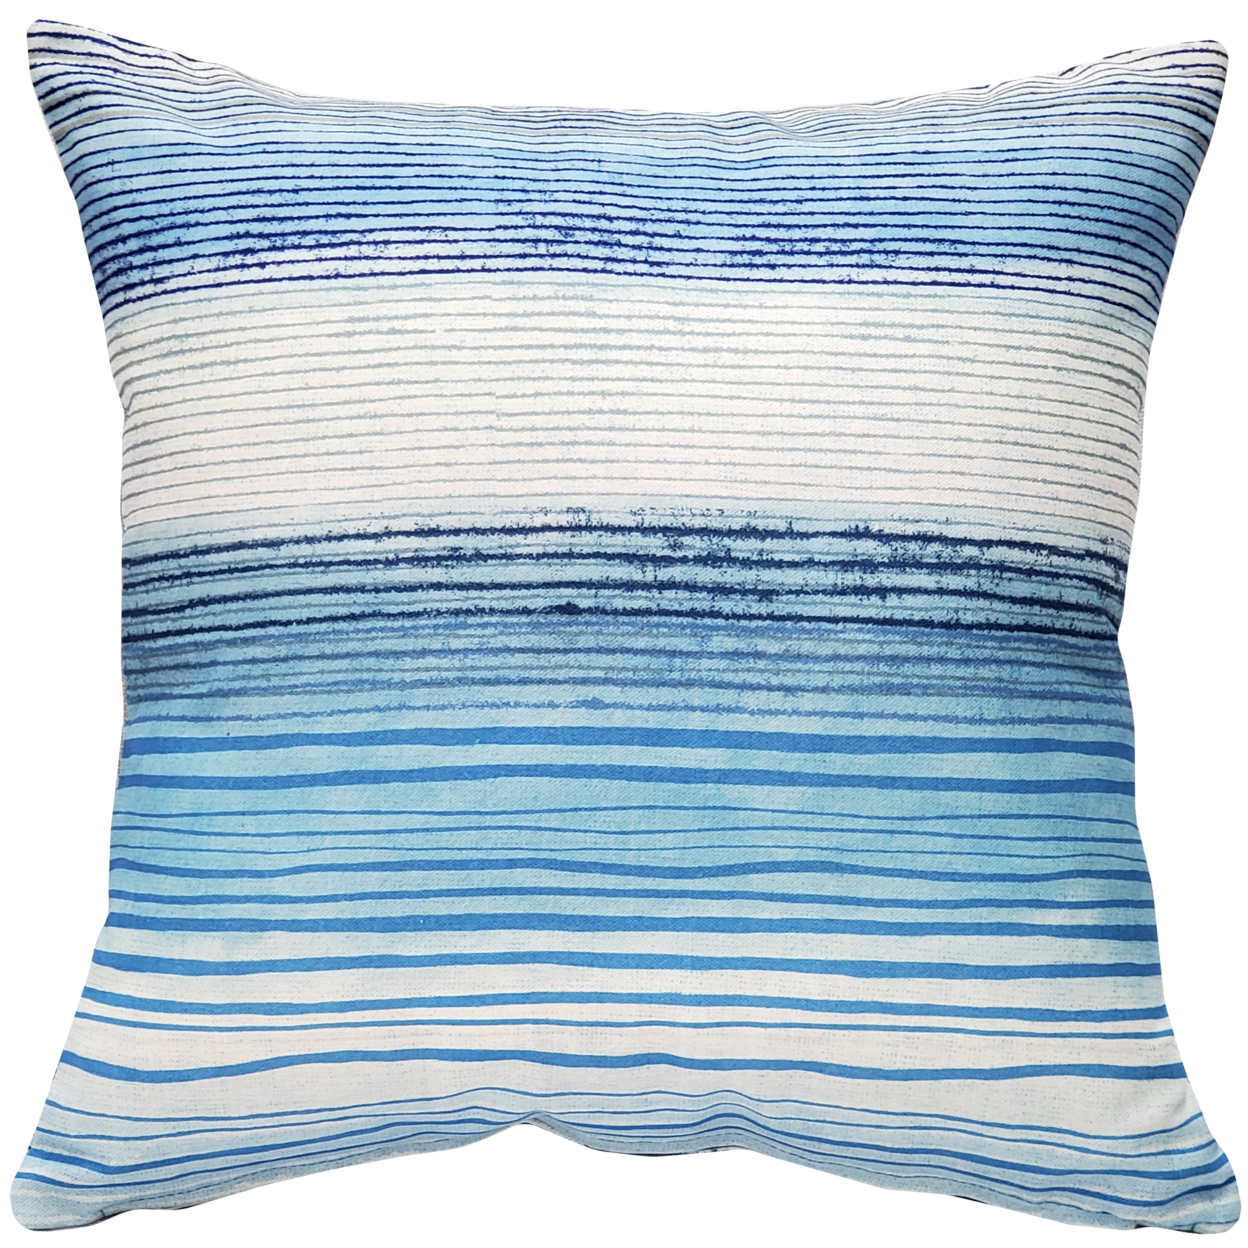 Sedona Stripes Blue Throw Pillow 17x17 Inches Square, Complete Pillow With Polyfill Pillow Insert